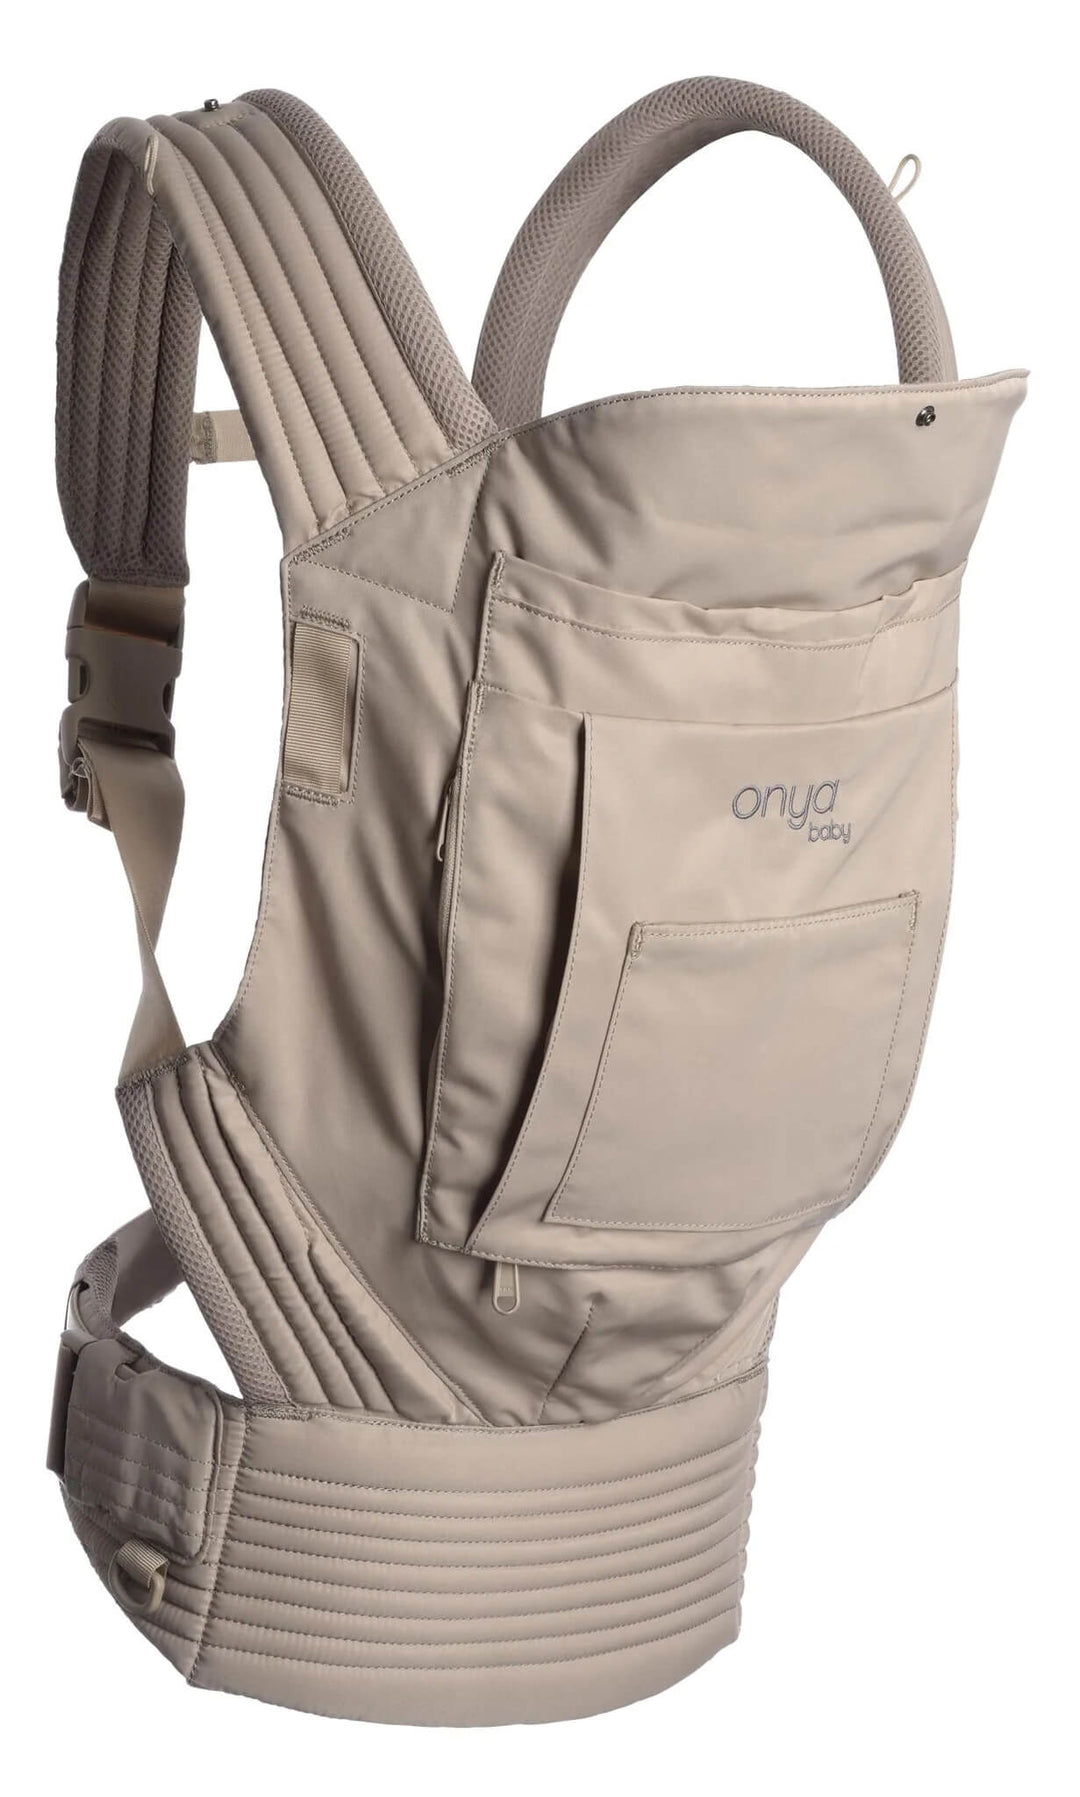 Side View of Warm Sand Colored Nexstep Baby Carrier by Onya Baby